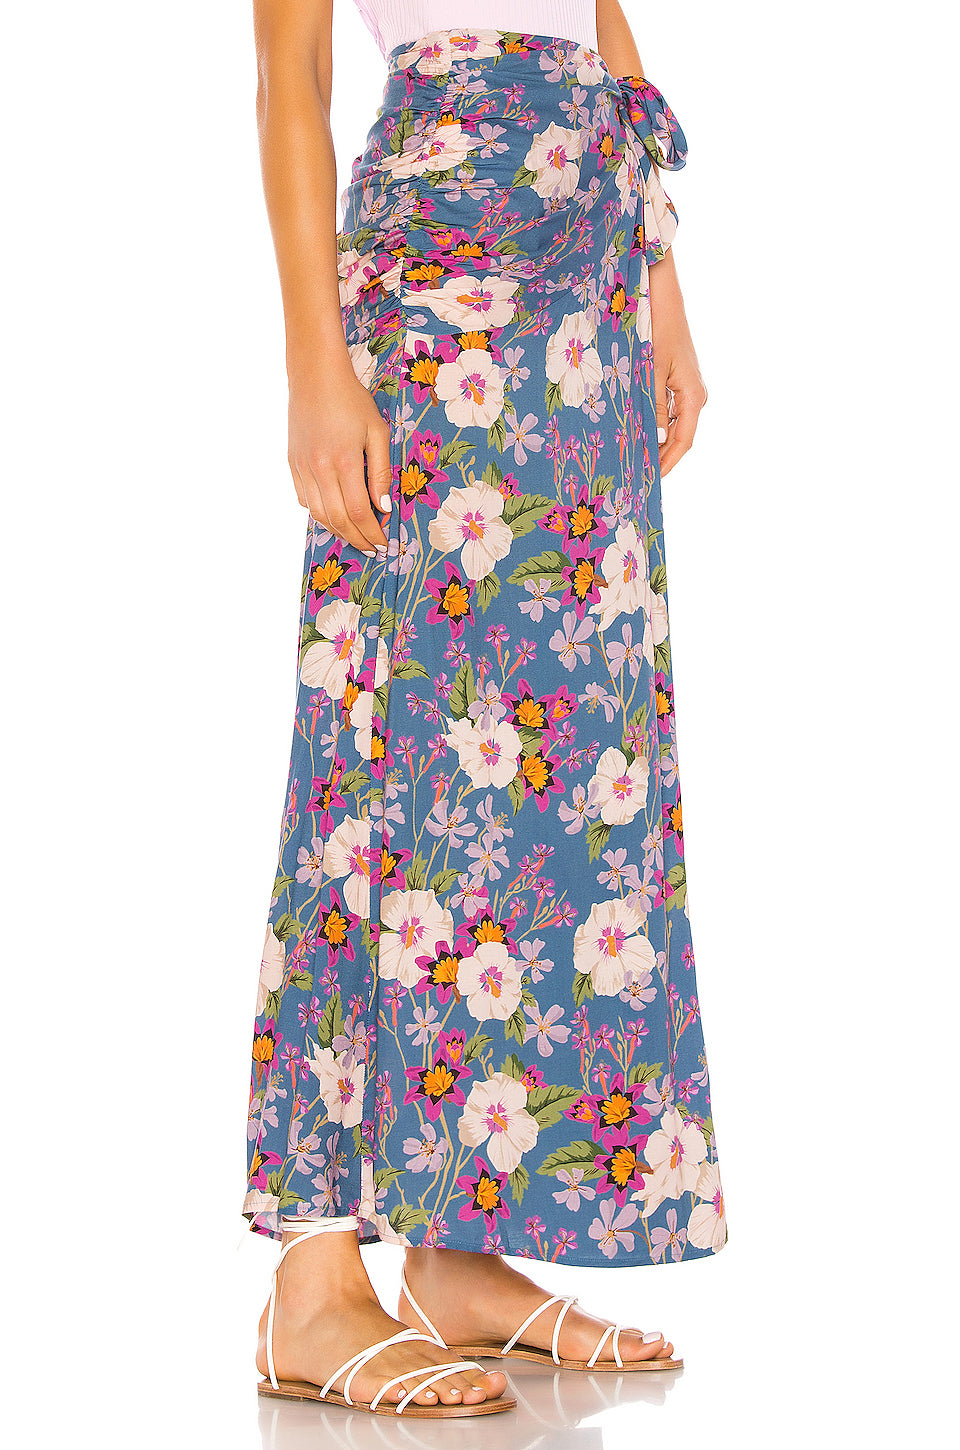 Bayshore Skirt in SPRING FIELD FLORAL